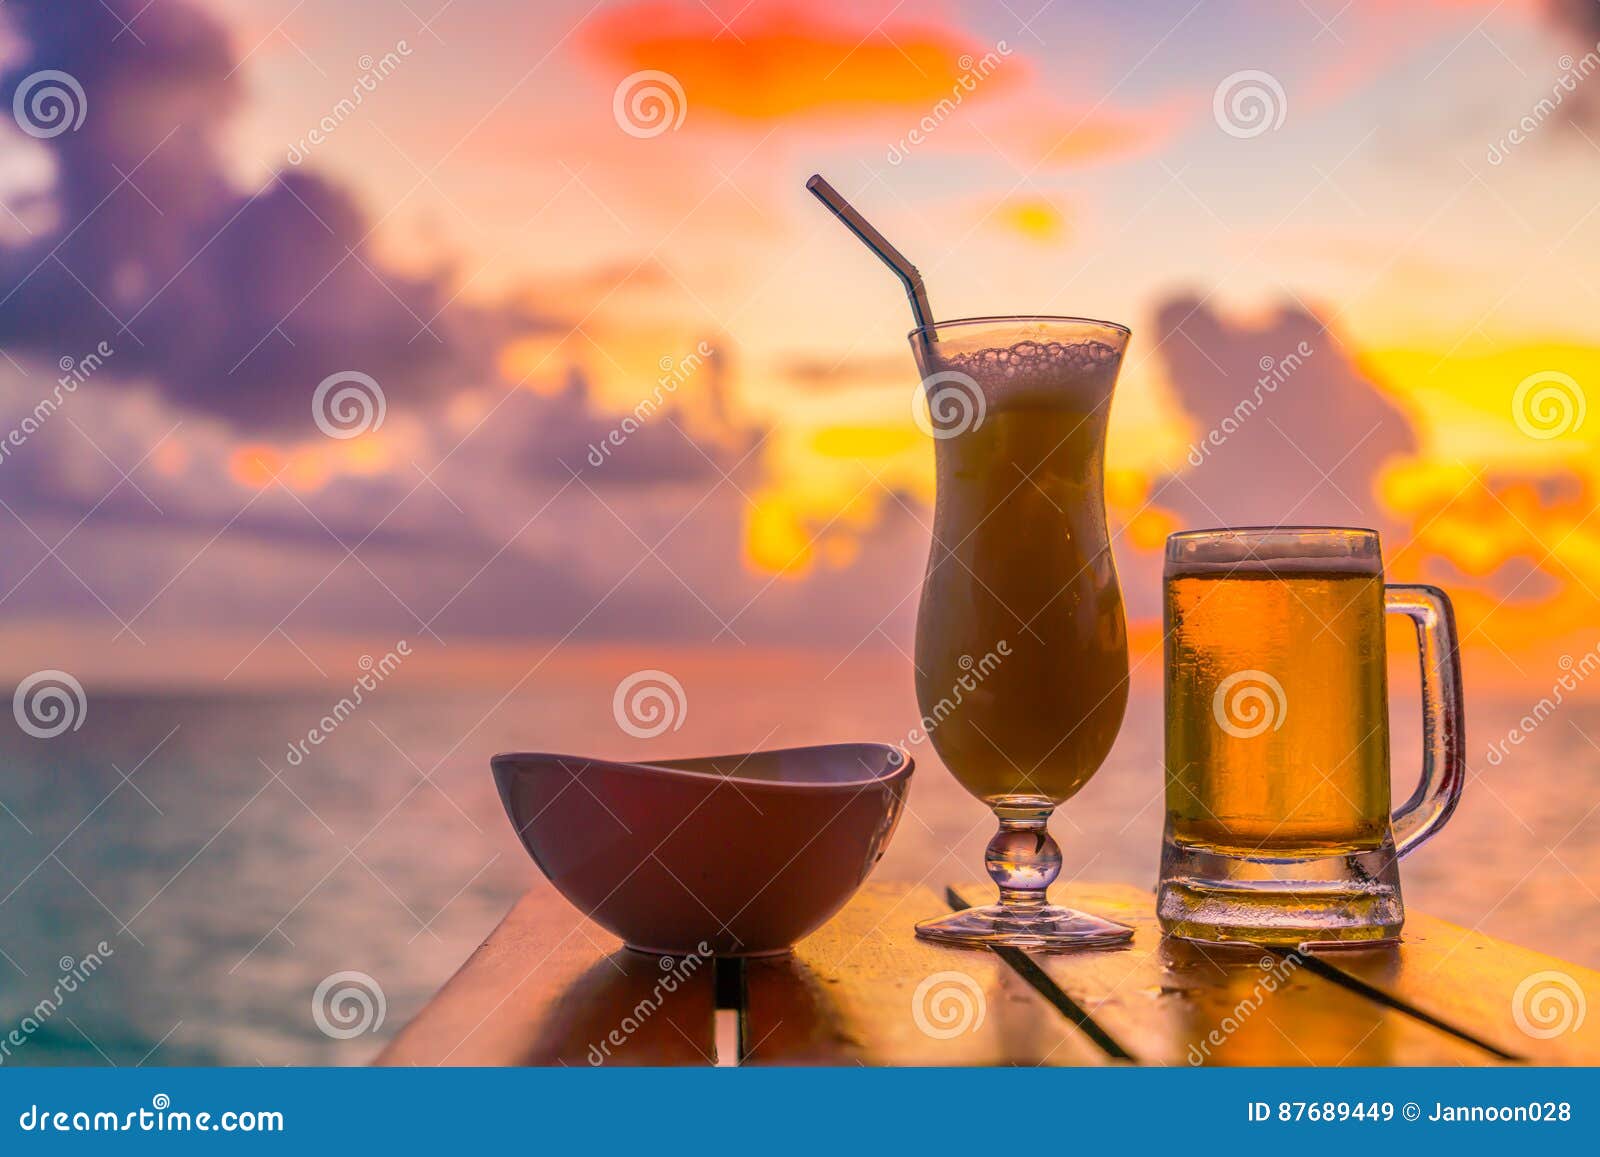 A Glass of Beer with Beautiful Tropical Maldives Island . Stock Image ...